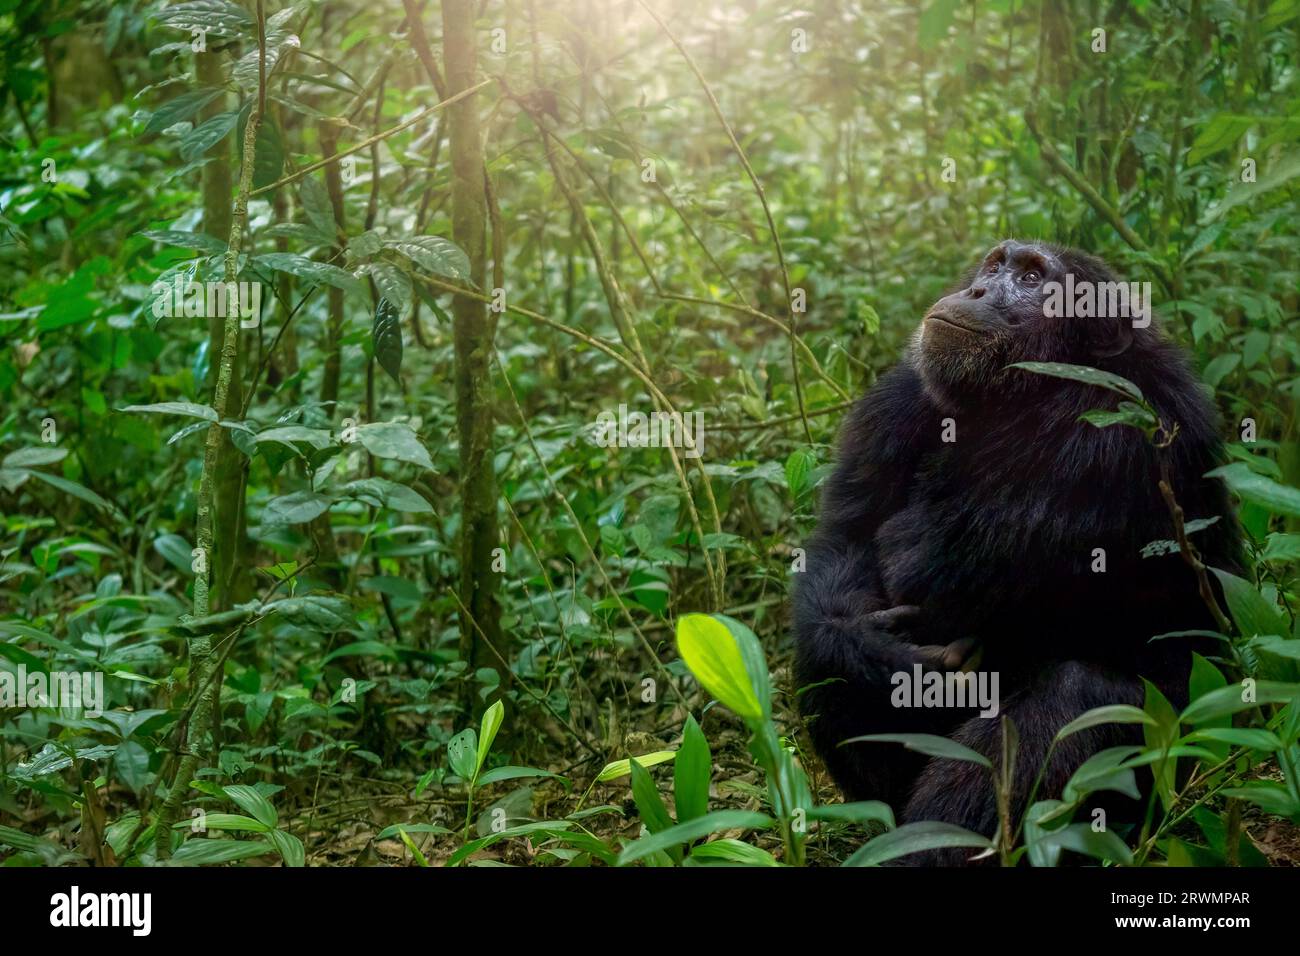 A chimpanzee (Pan troglodytes) sitting on the ground amid the dense forest of Kibale National Park in Uganda, looking up at offscreen chimps in trees. Stock Photo